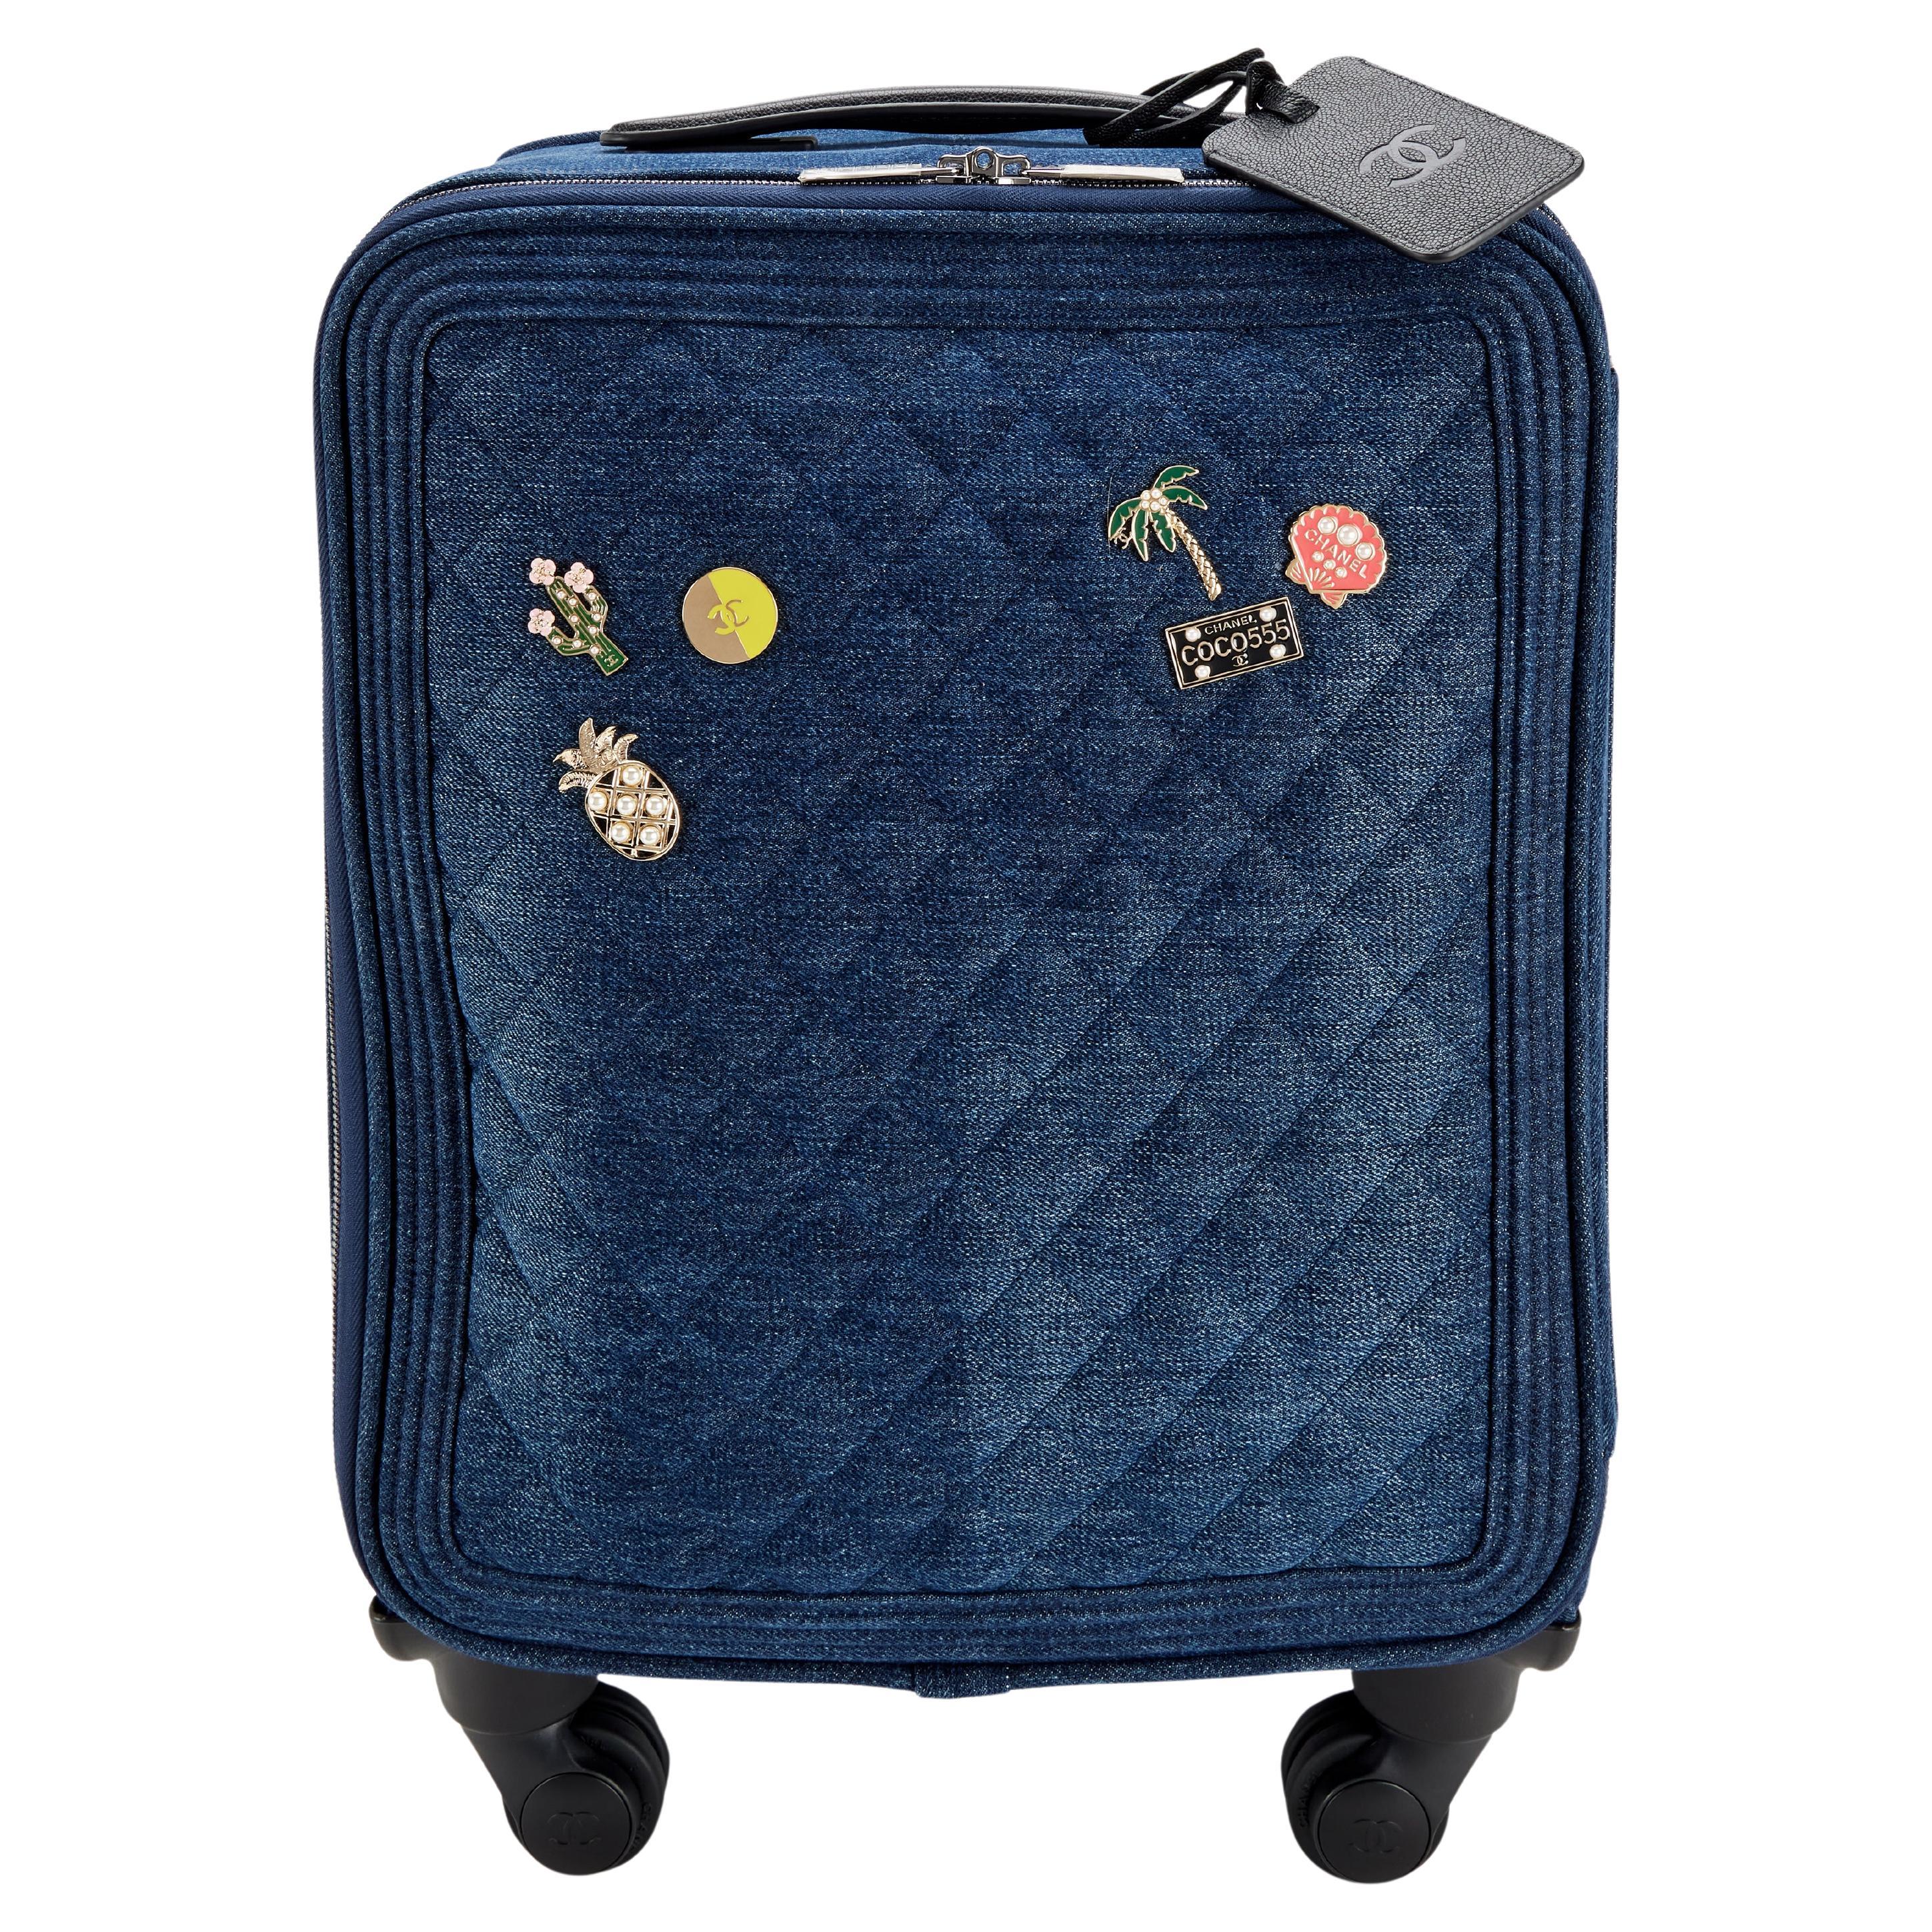 Chanel Coco Charm Denim Jean Trolley Travel Luggage Rolling Carry On Bag For Sale